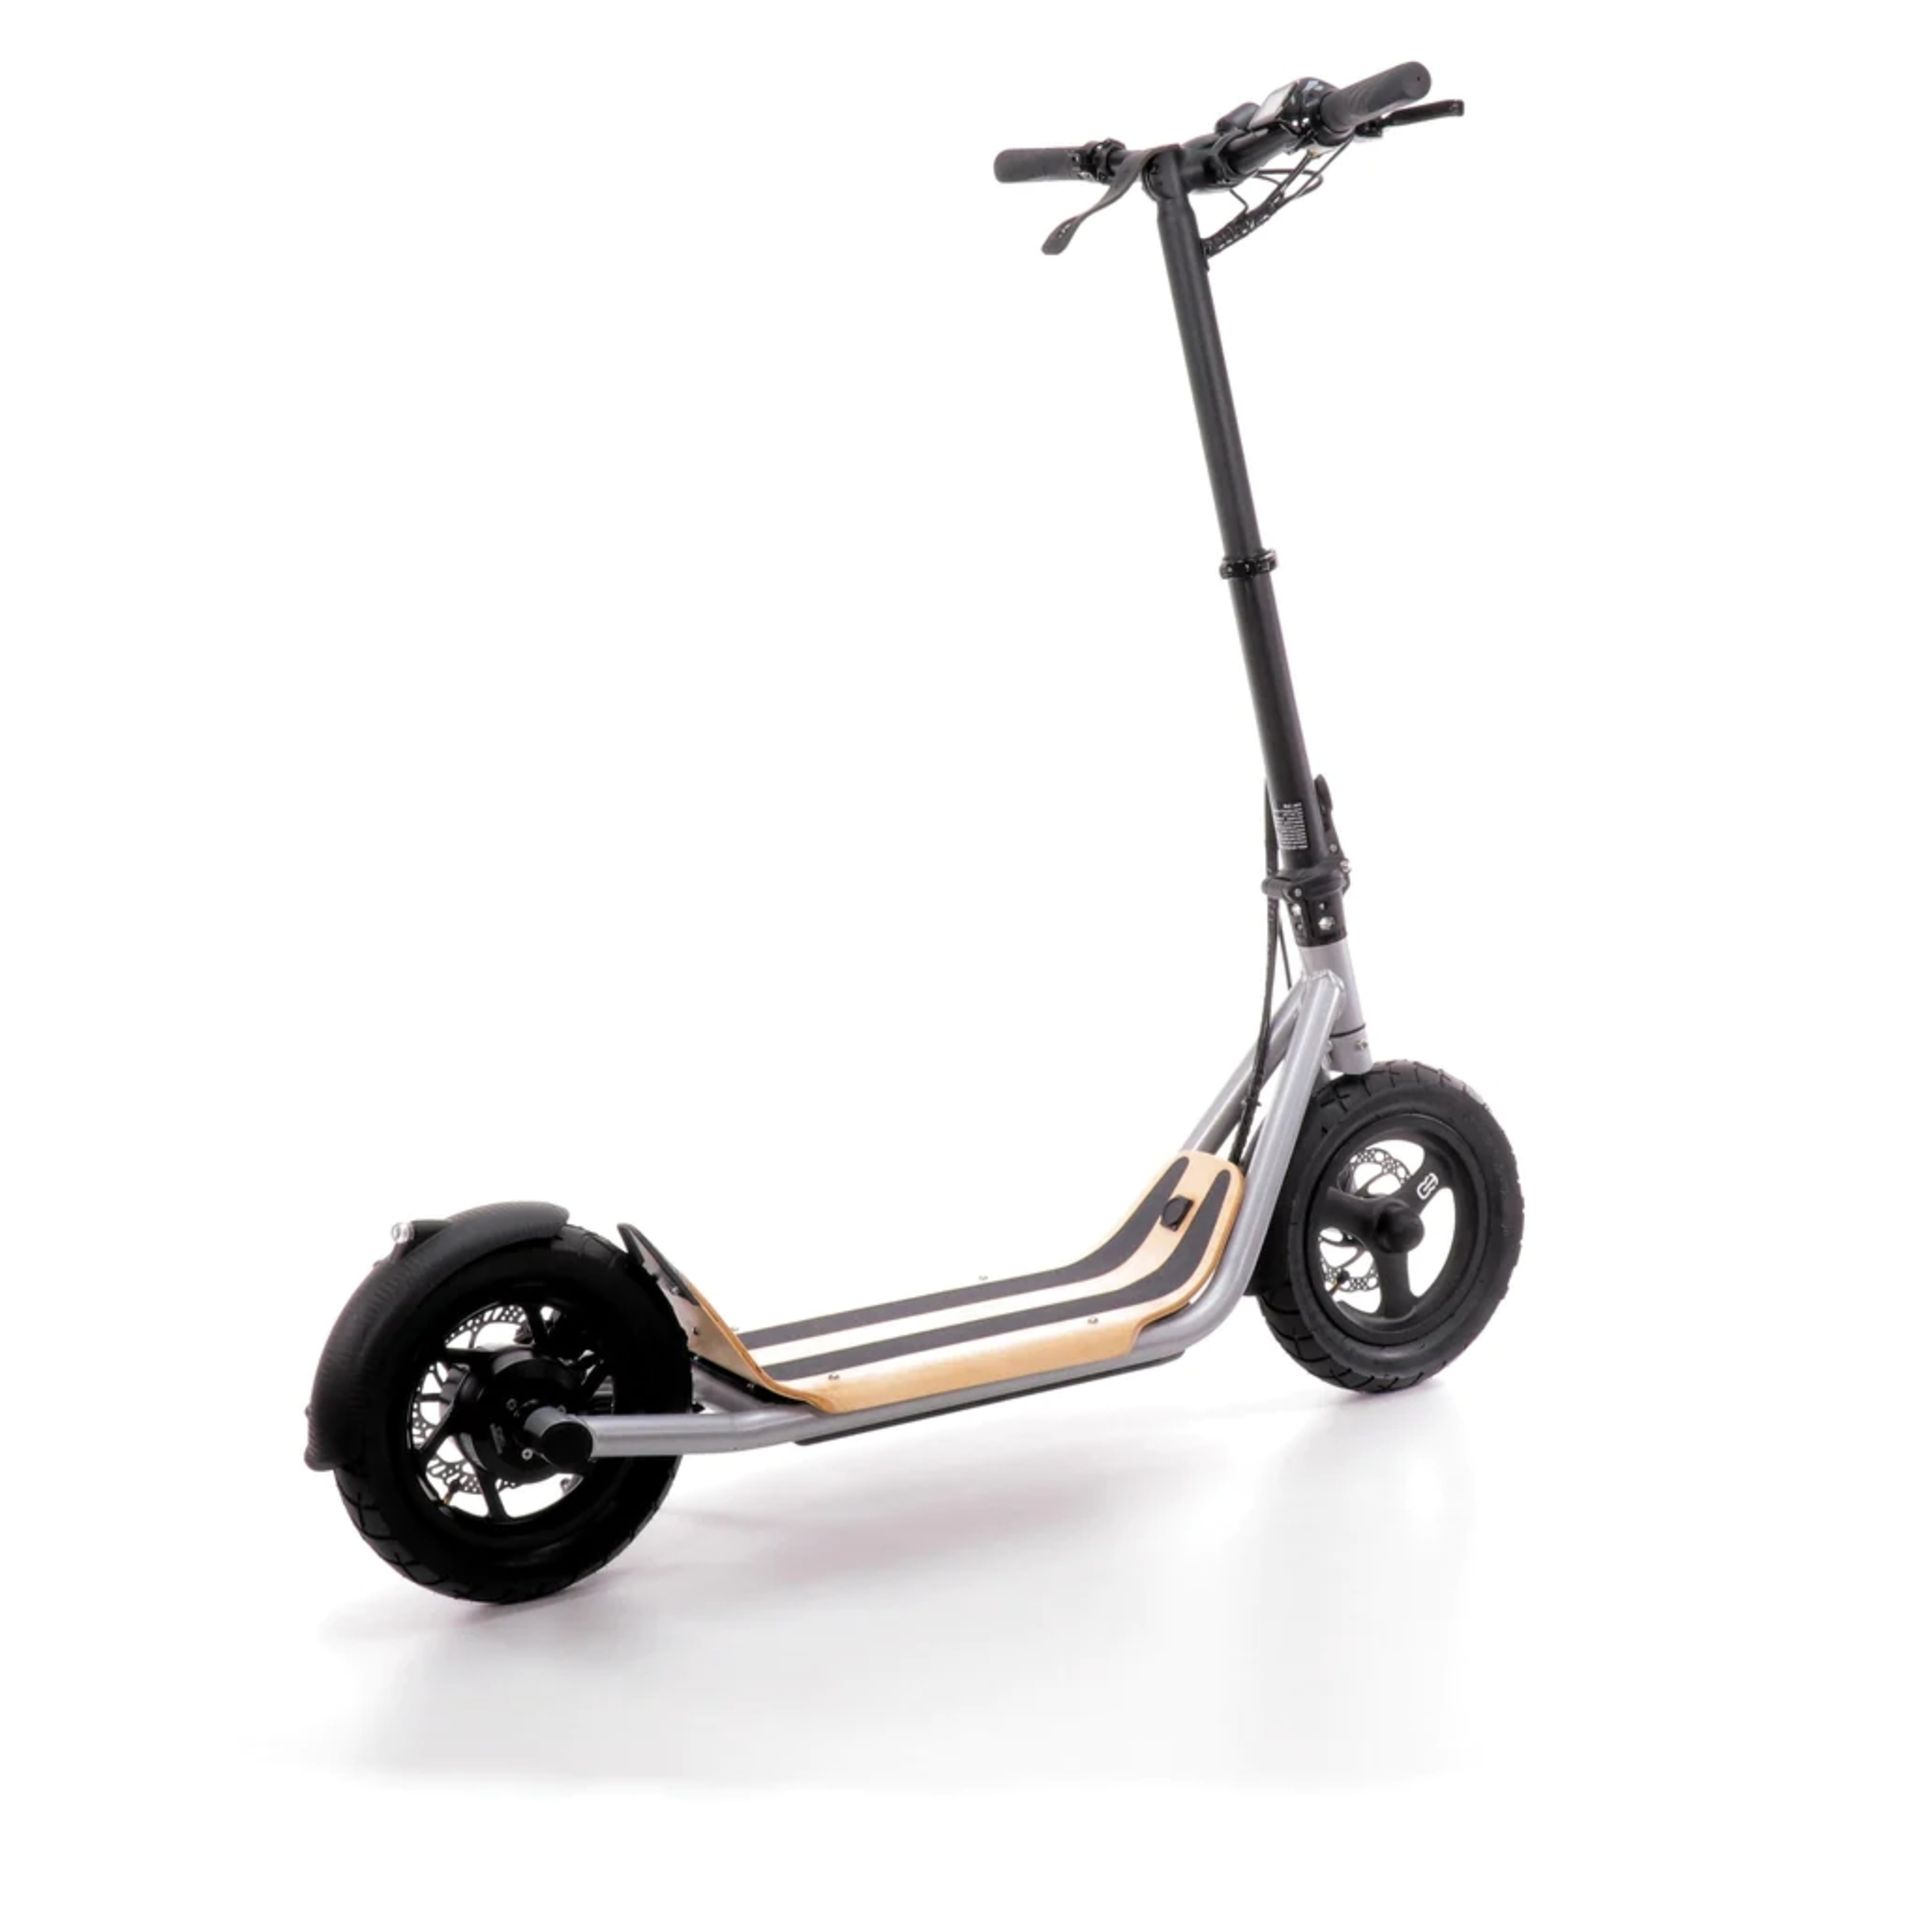 BRAND NEW 8TEV B12 PROXI CLASSIC ELECTRIC SCOOTER SILVER RRP £1299, Perfect city commuter vehicle - Bild 2 aus 3